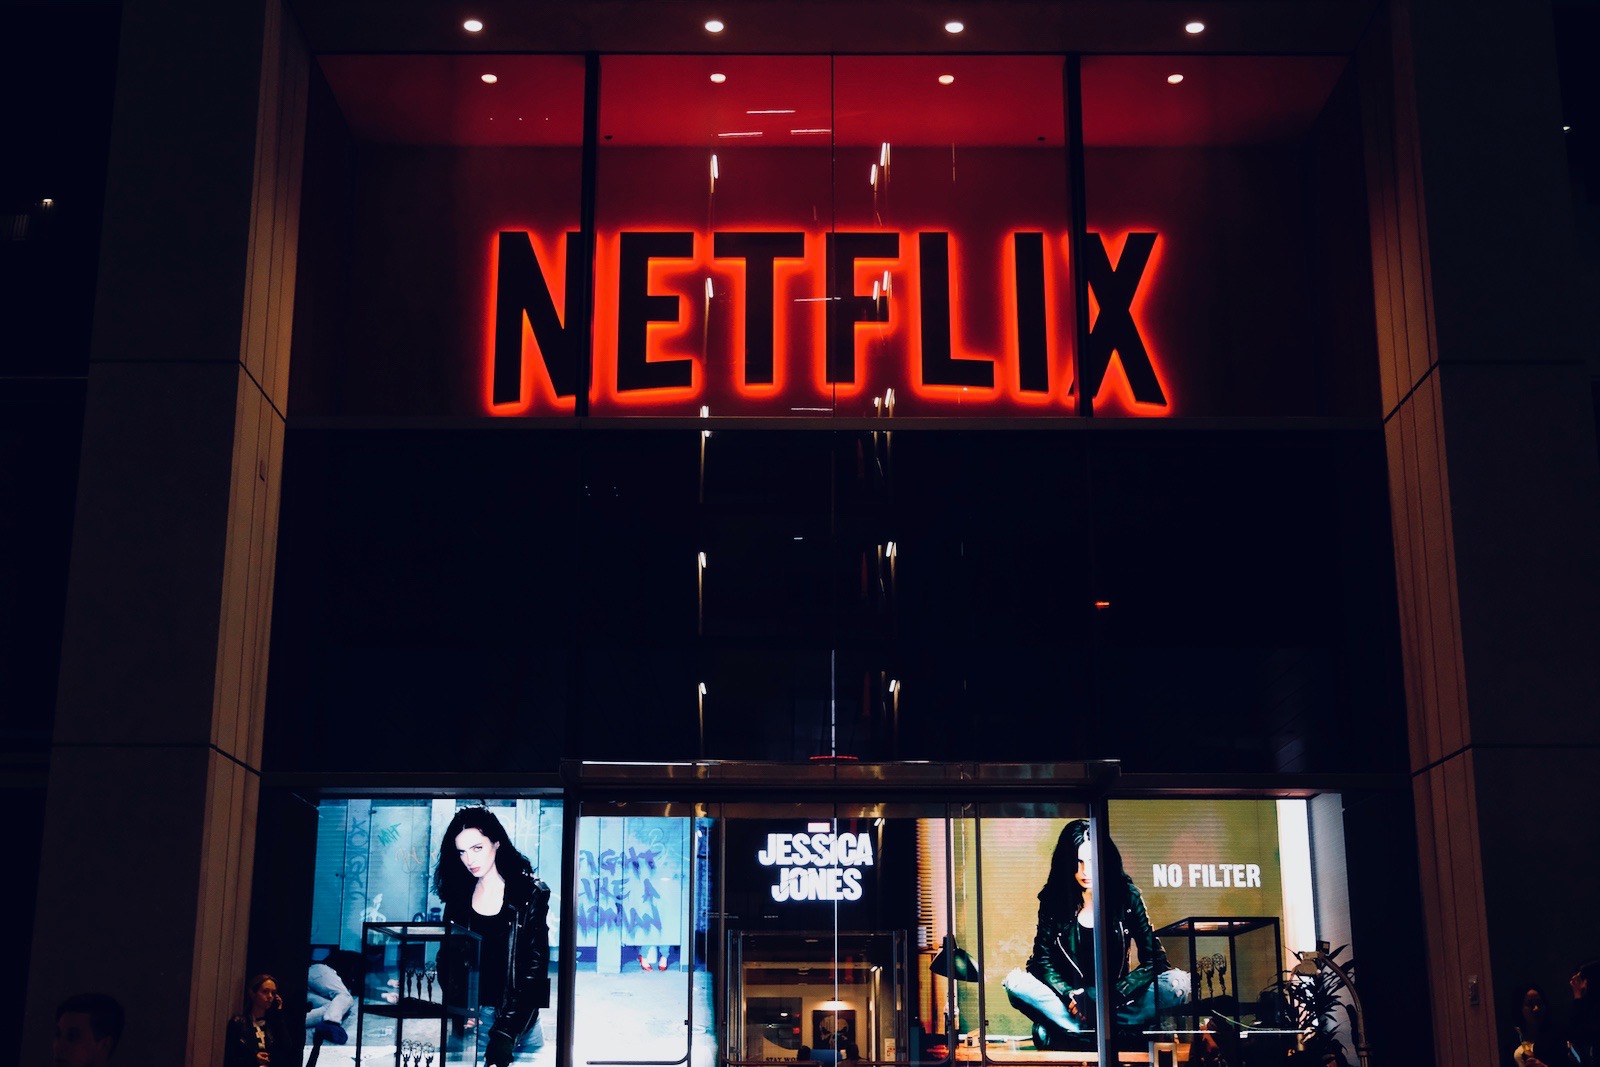 Netflix Gets a Price Target Cut from Goldman Sachs and Raymond James